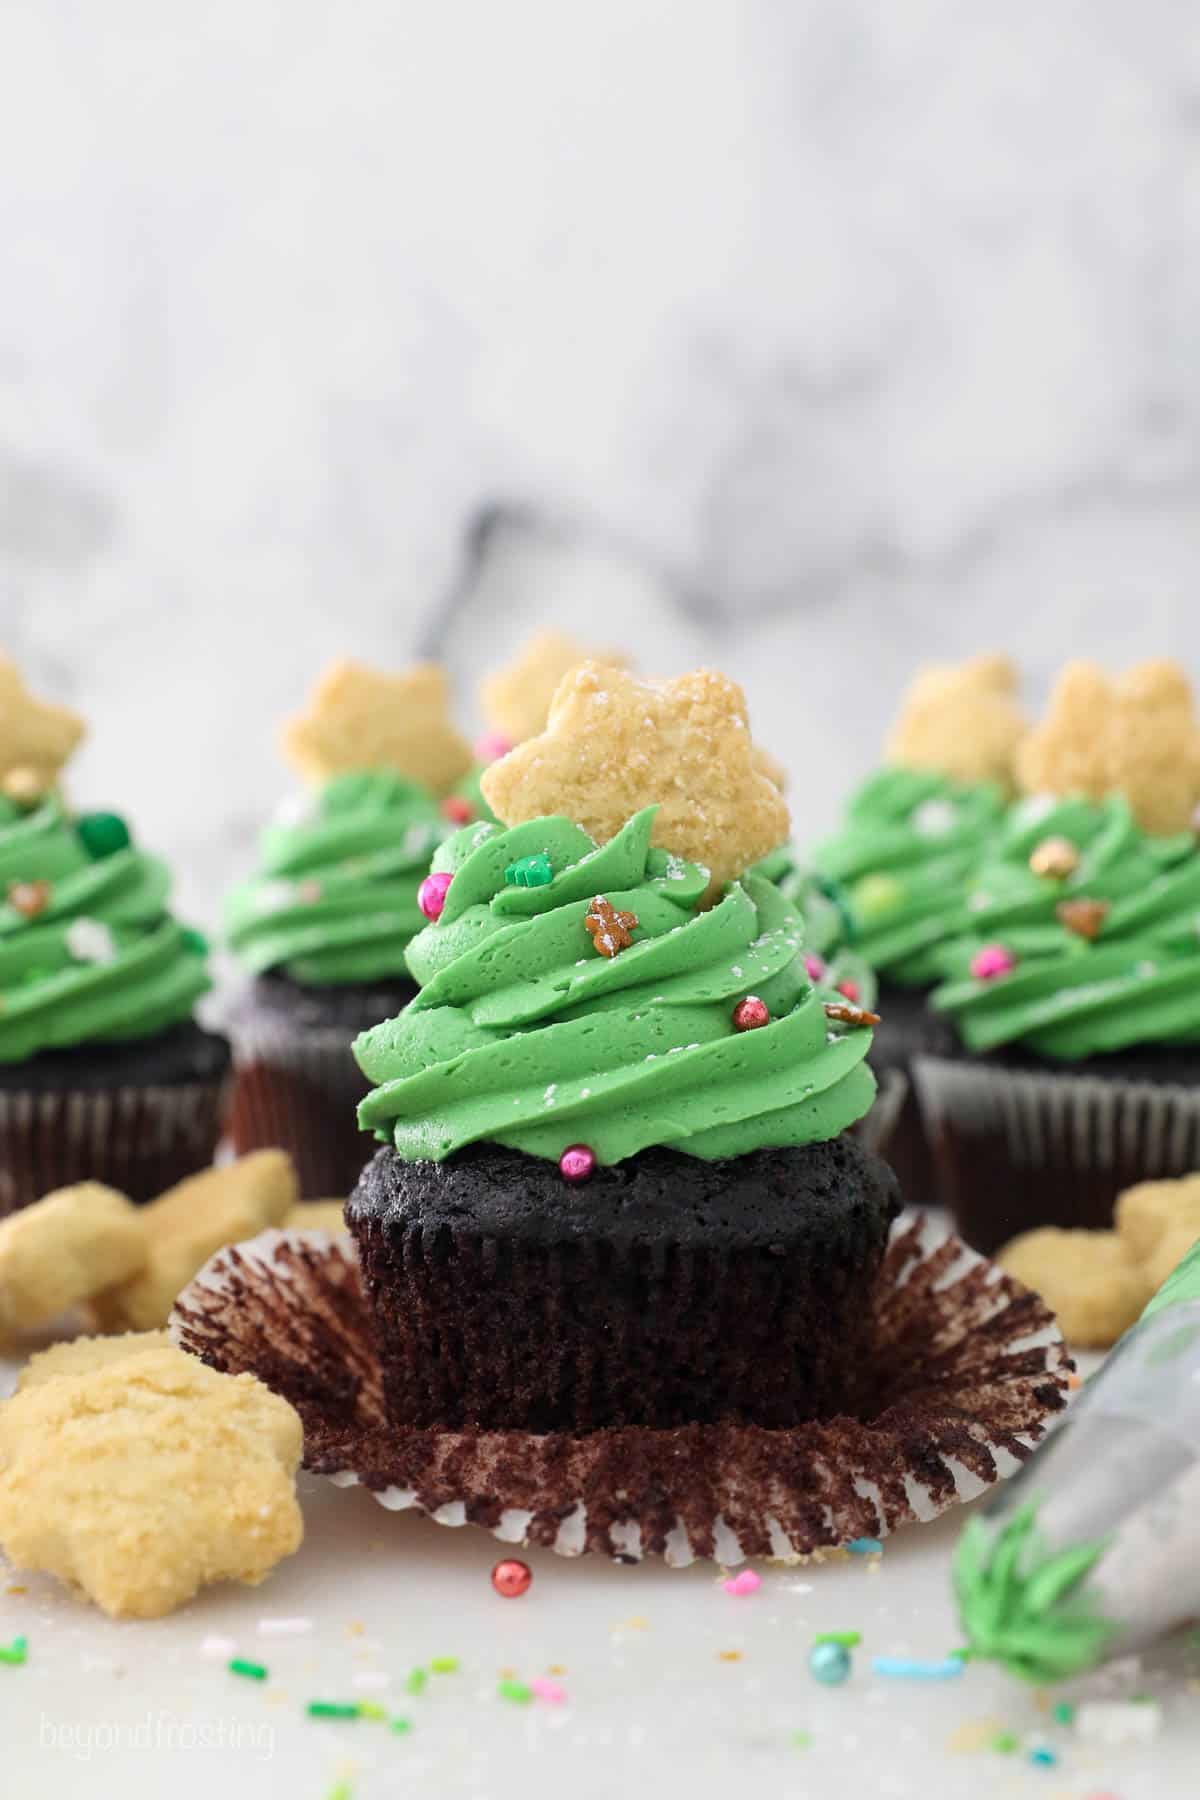 Unwrapped Chocolate Cupcake with Green frosting decorated to look like a Christmas tree